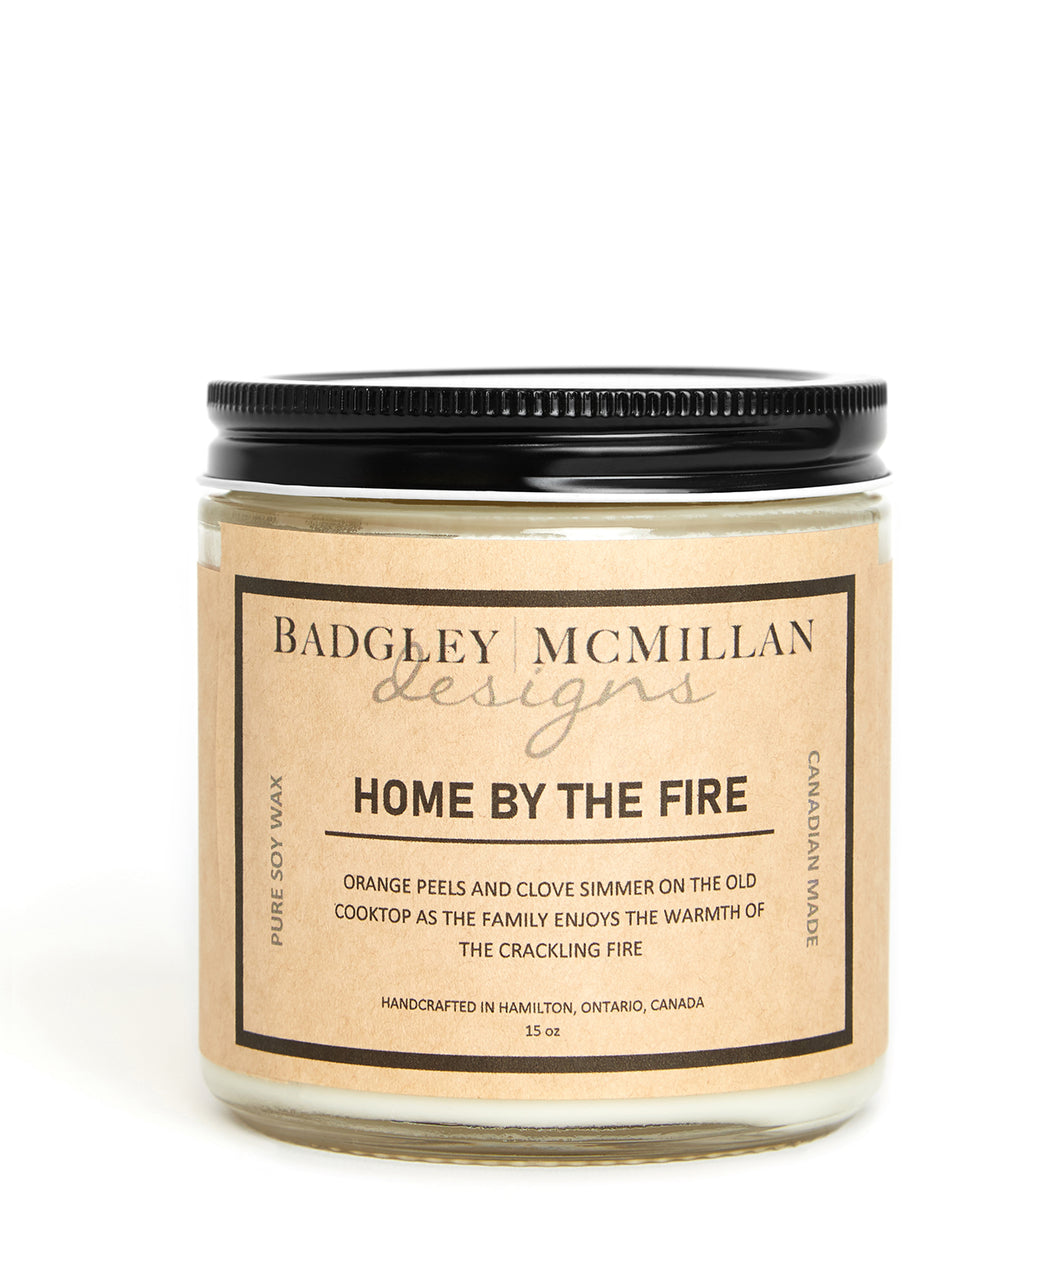 Home by the Fire 15 oz Soy Jar Candle